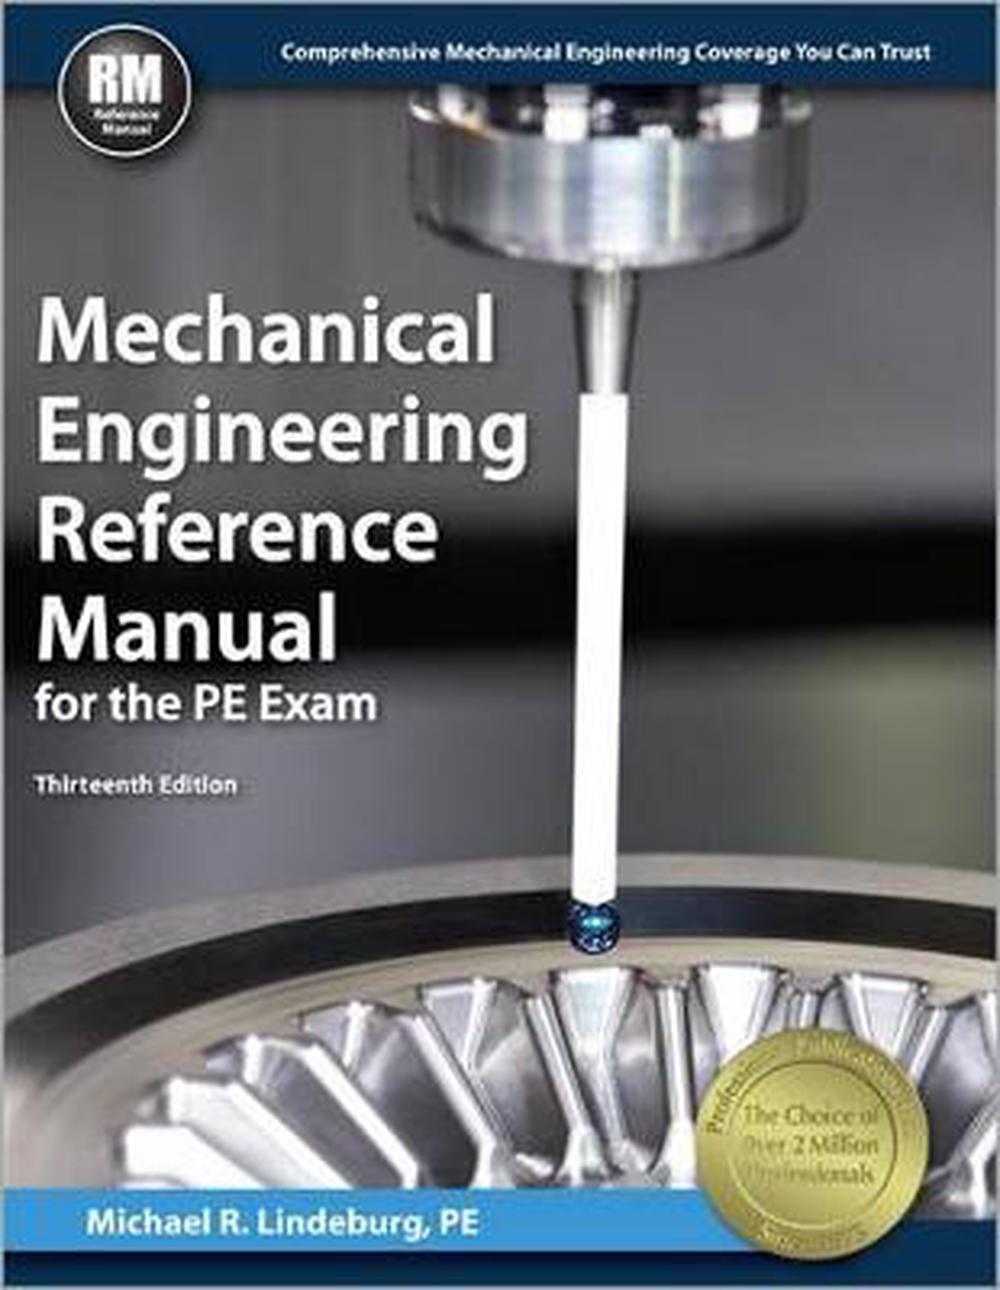 Mechanical Engineering Reference Manual for the PE Exam by Michael R. Lindeburg 9781591264149 eBay